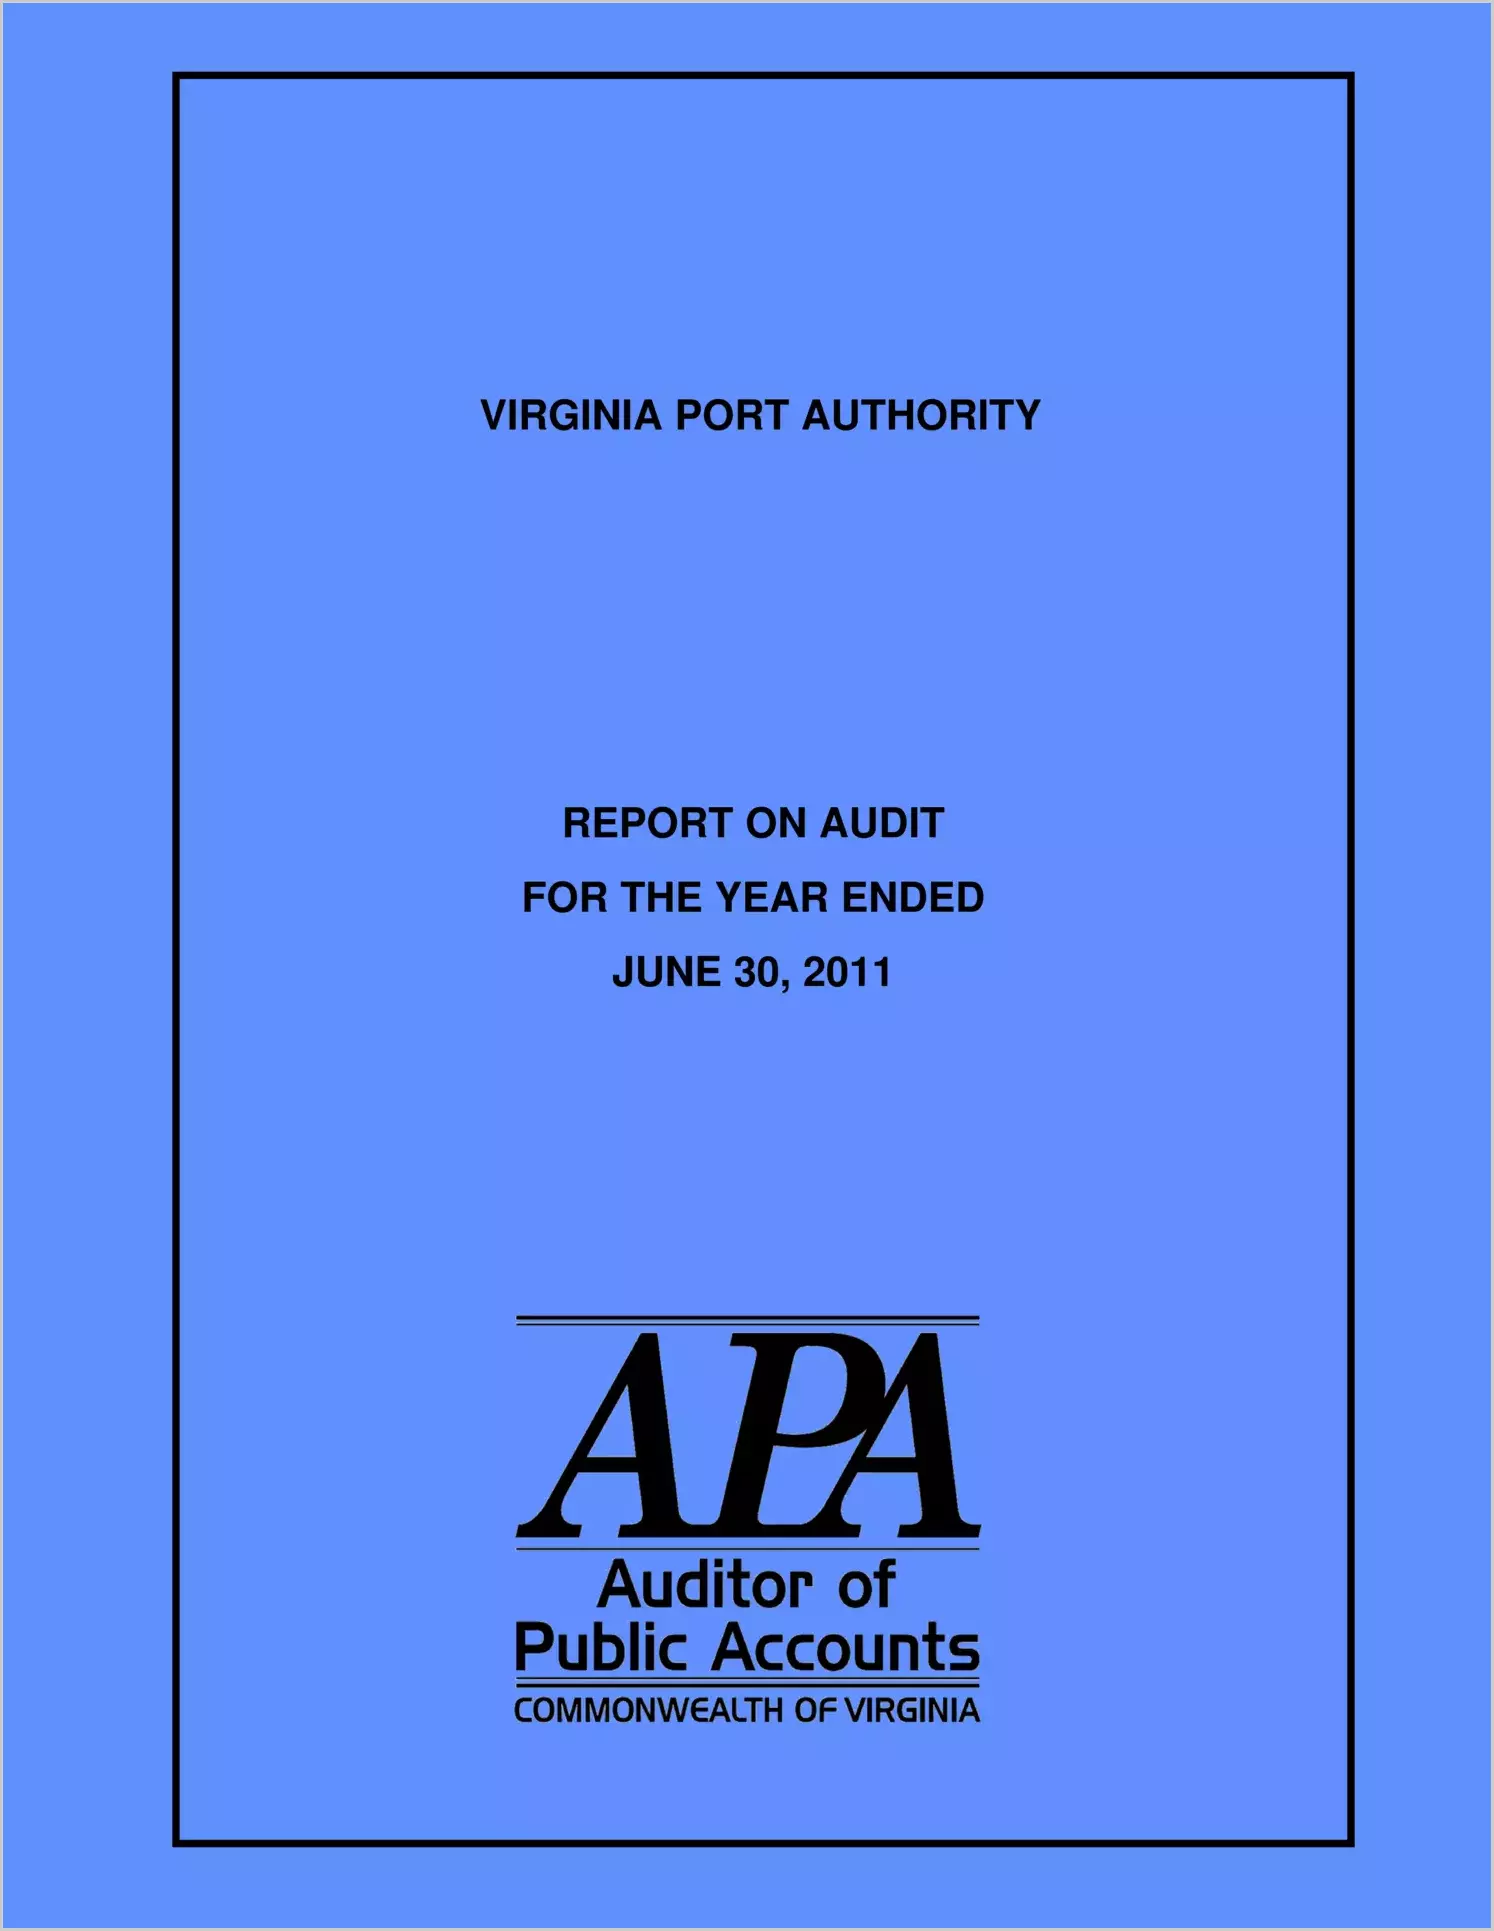 Virginia Port Authority for the year ended June 30, 2011